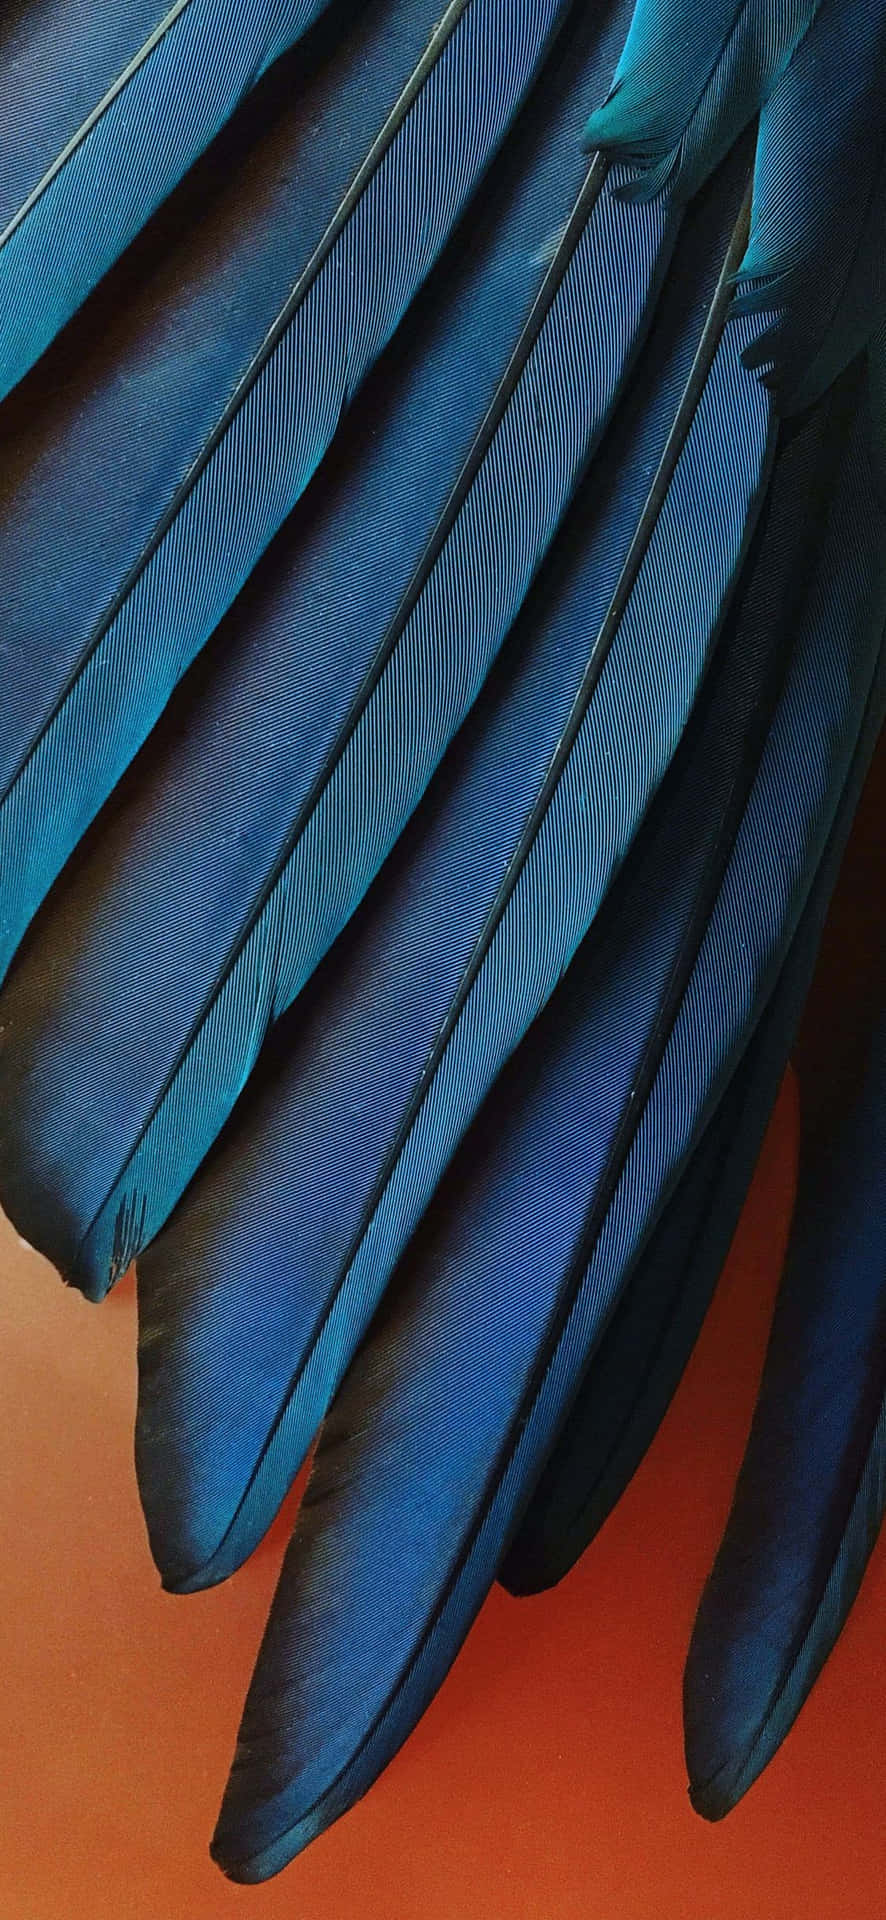 Iphone Xr Stock Teal Blue Feathers Wallpaper